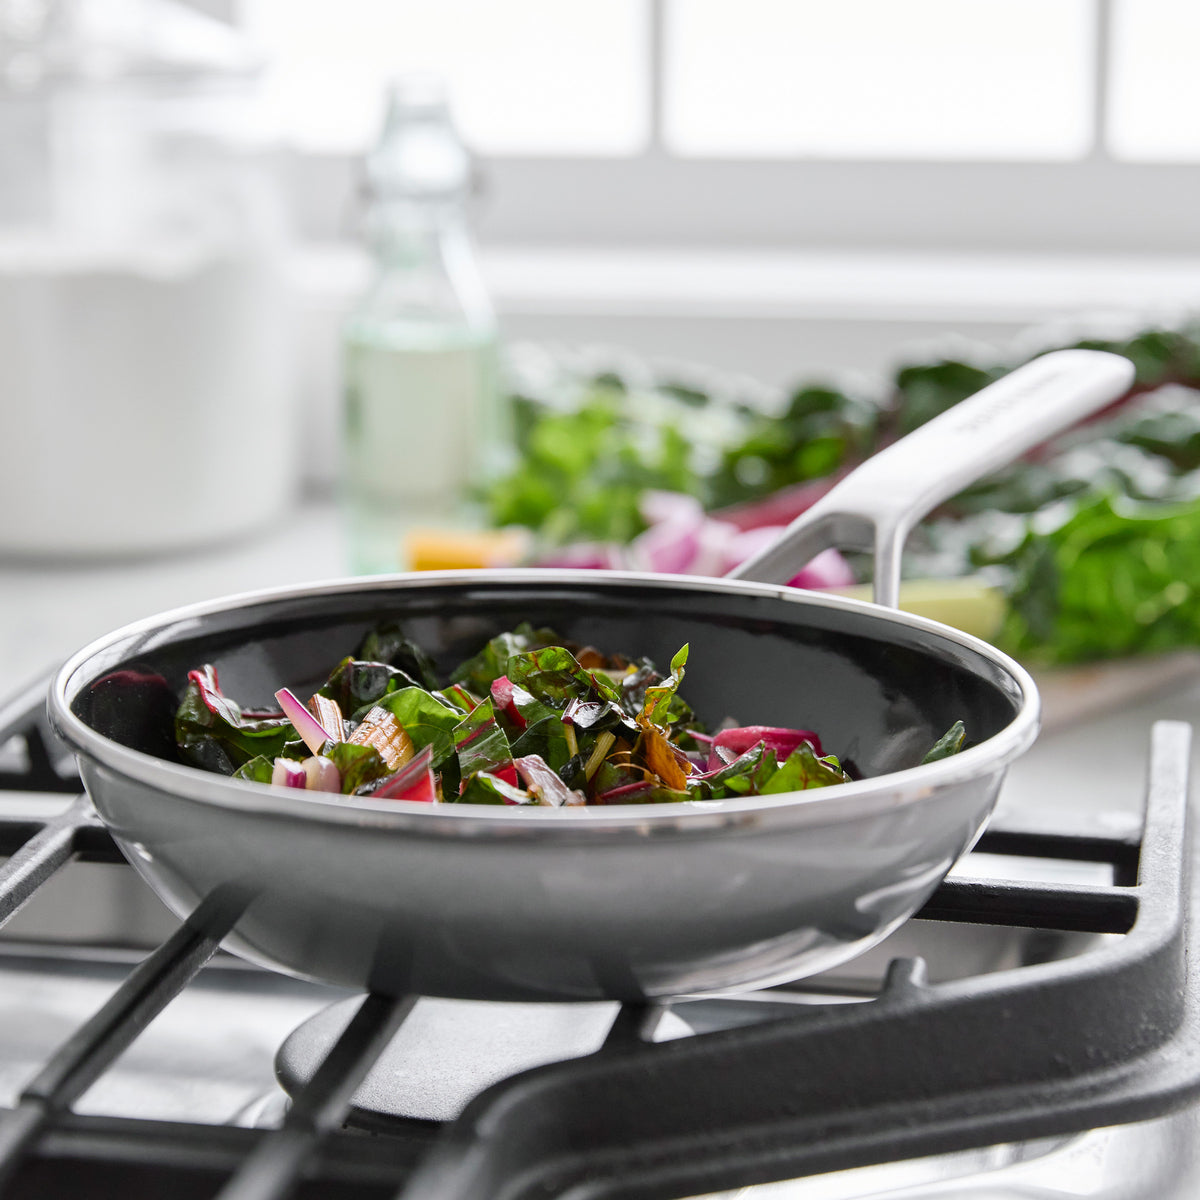 Calphalon Tri-Ply Stainless 12 Covered Stir Fry Pan